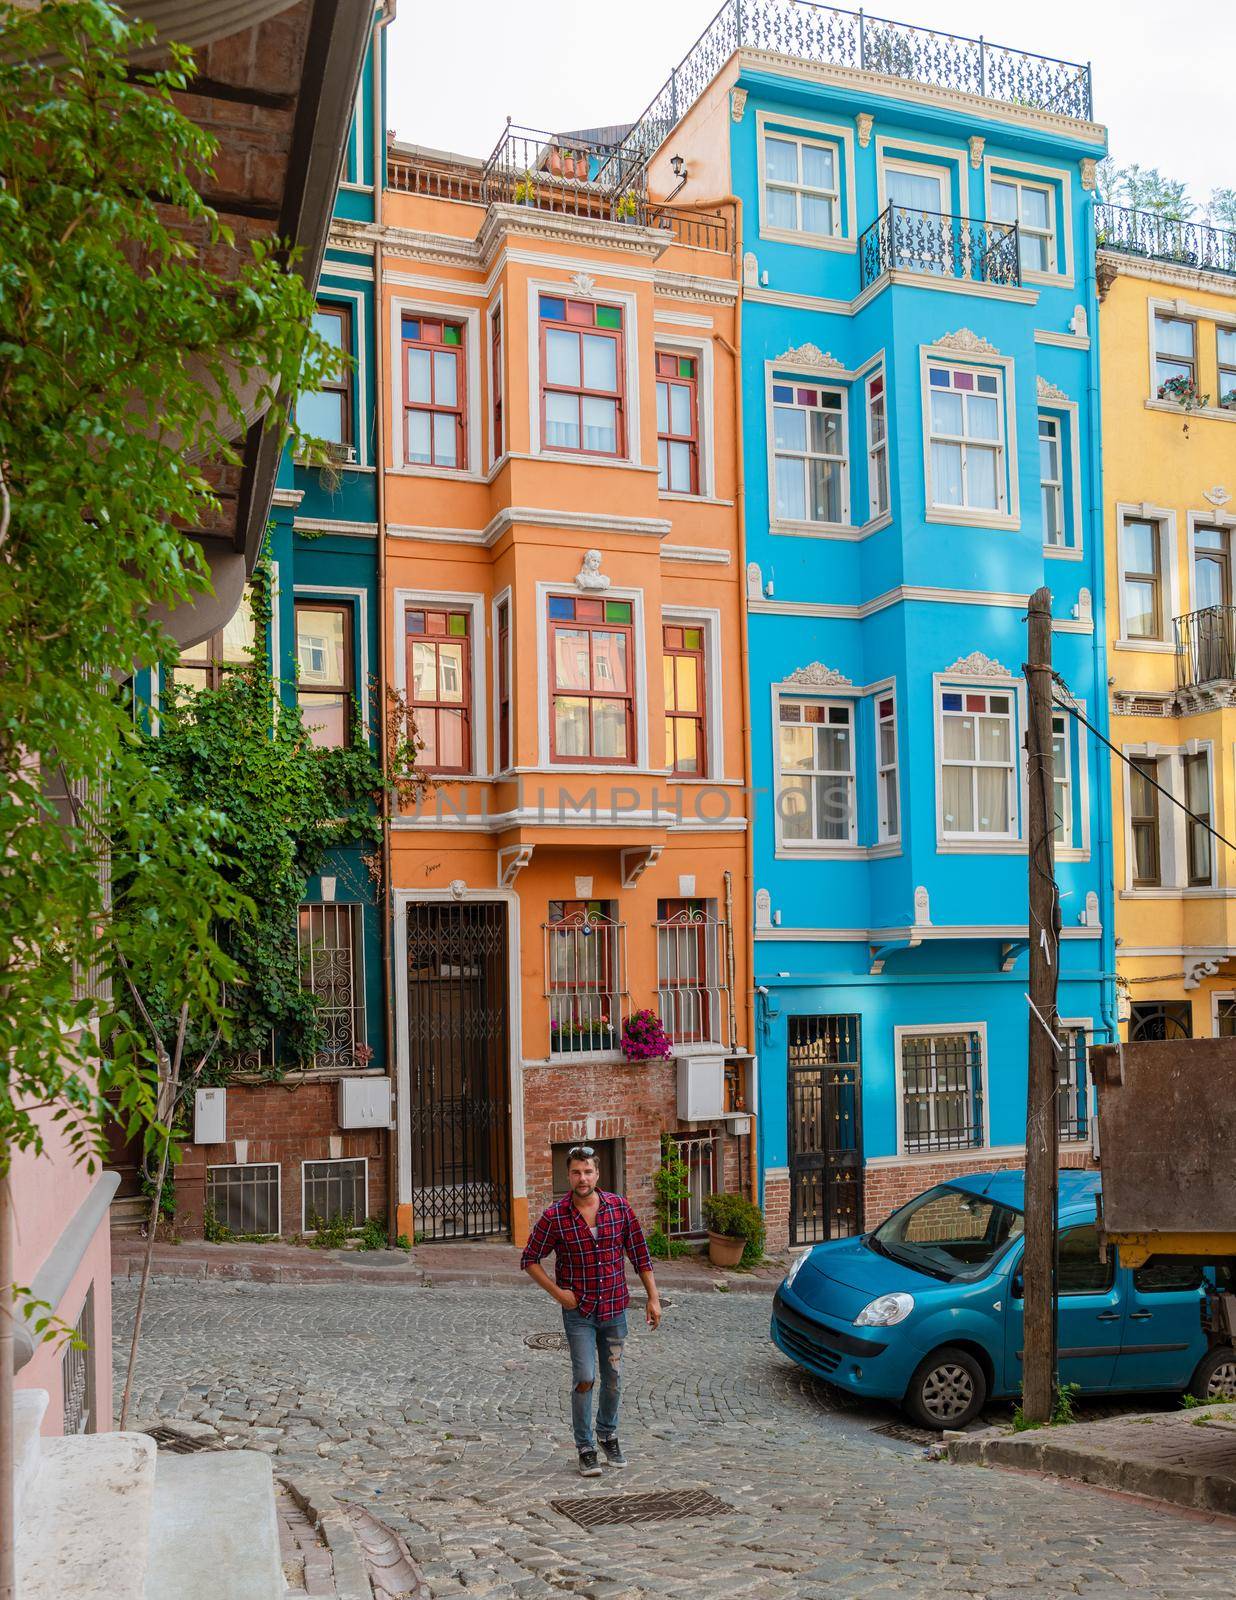 Balat district Istanbul Turkey July 2018, colorful homes and houses at the town by fokkebok